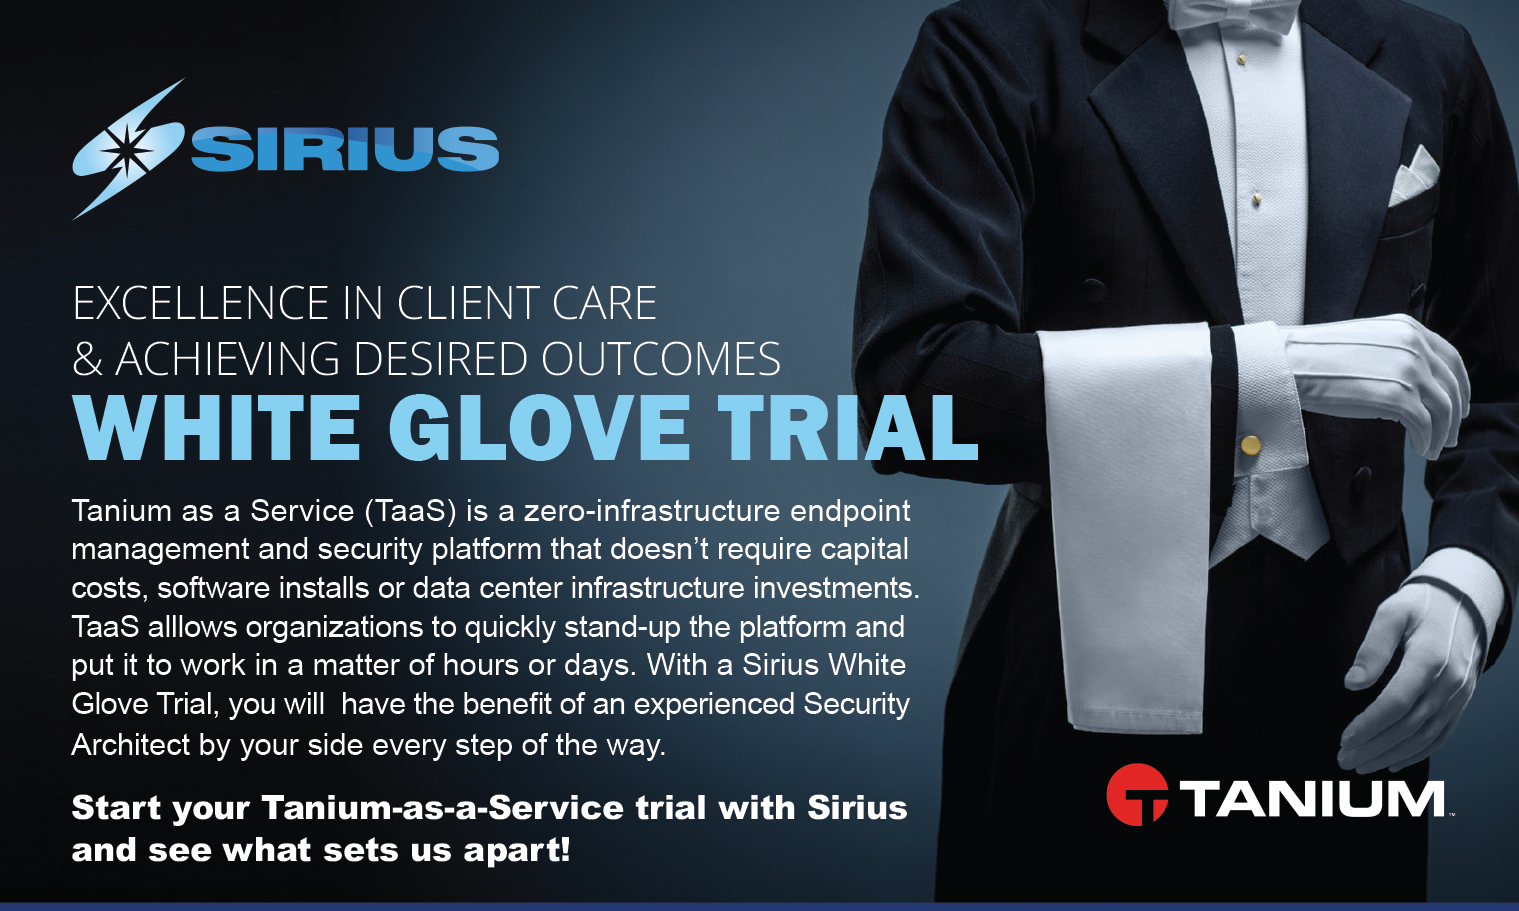 Excellence in client care & achieving desired outcomes: Whit Glove Trial